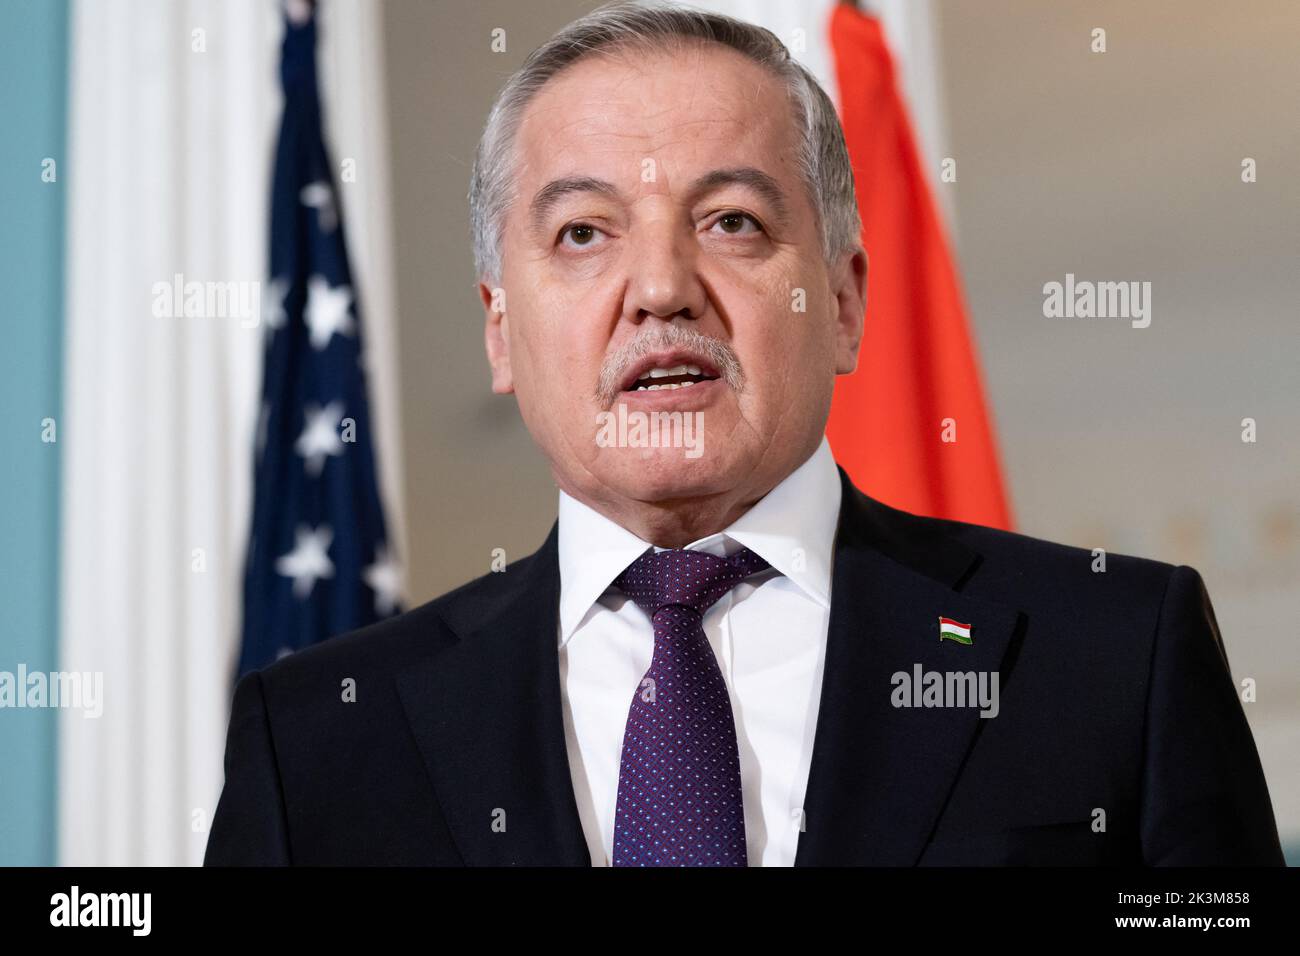 Tajikistan Foreign Minister Sirojiddin Muhriddin speaks to the press prior to meetings with US Secretary of State Antony Blinken at the State Department in Washington, DC, U.S. September 27, 2022. Saul Loeb/Pool via REUTERS Stock Photo